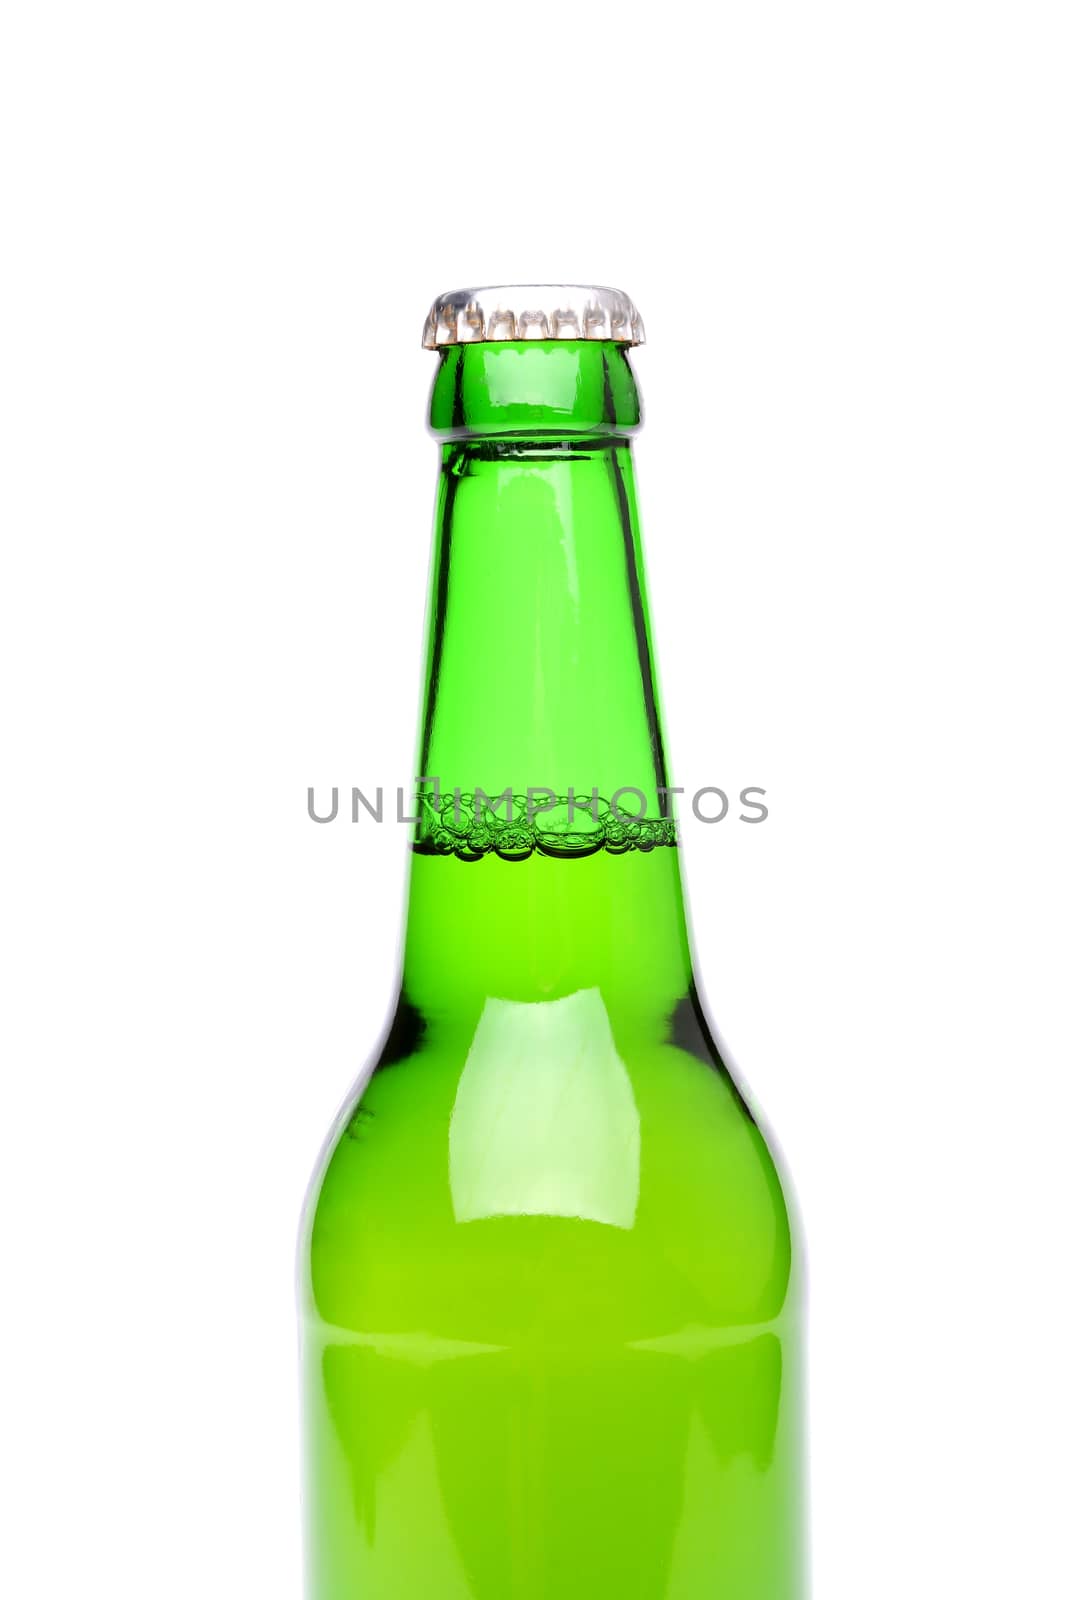 Beer bottle isolated on white by indigolotos